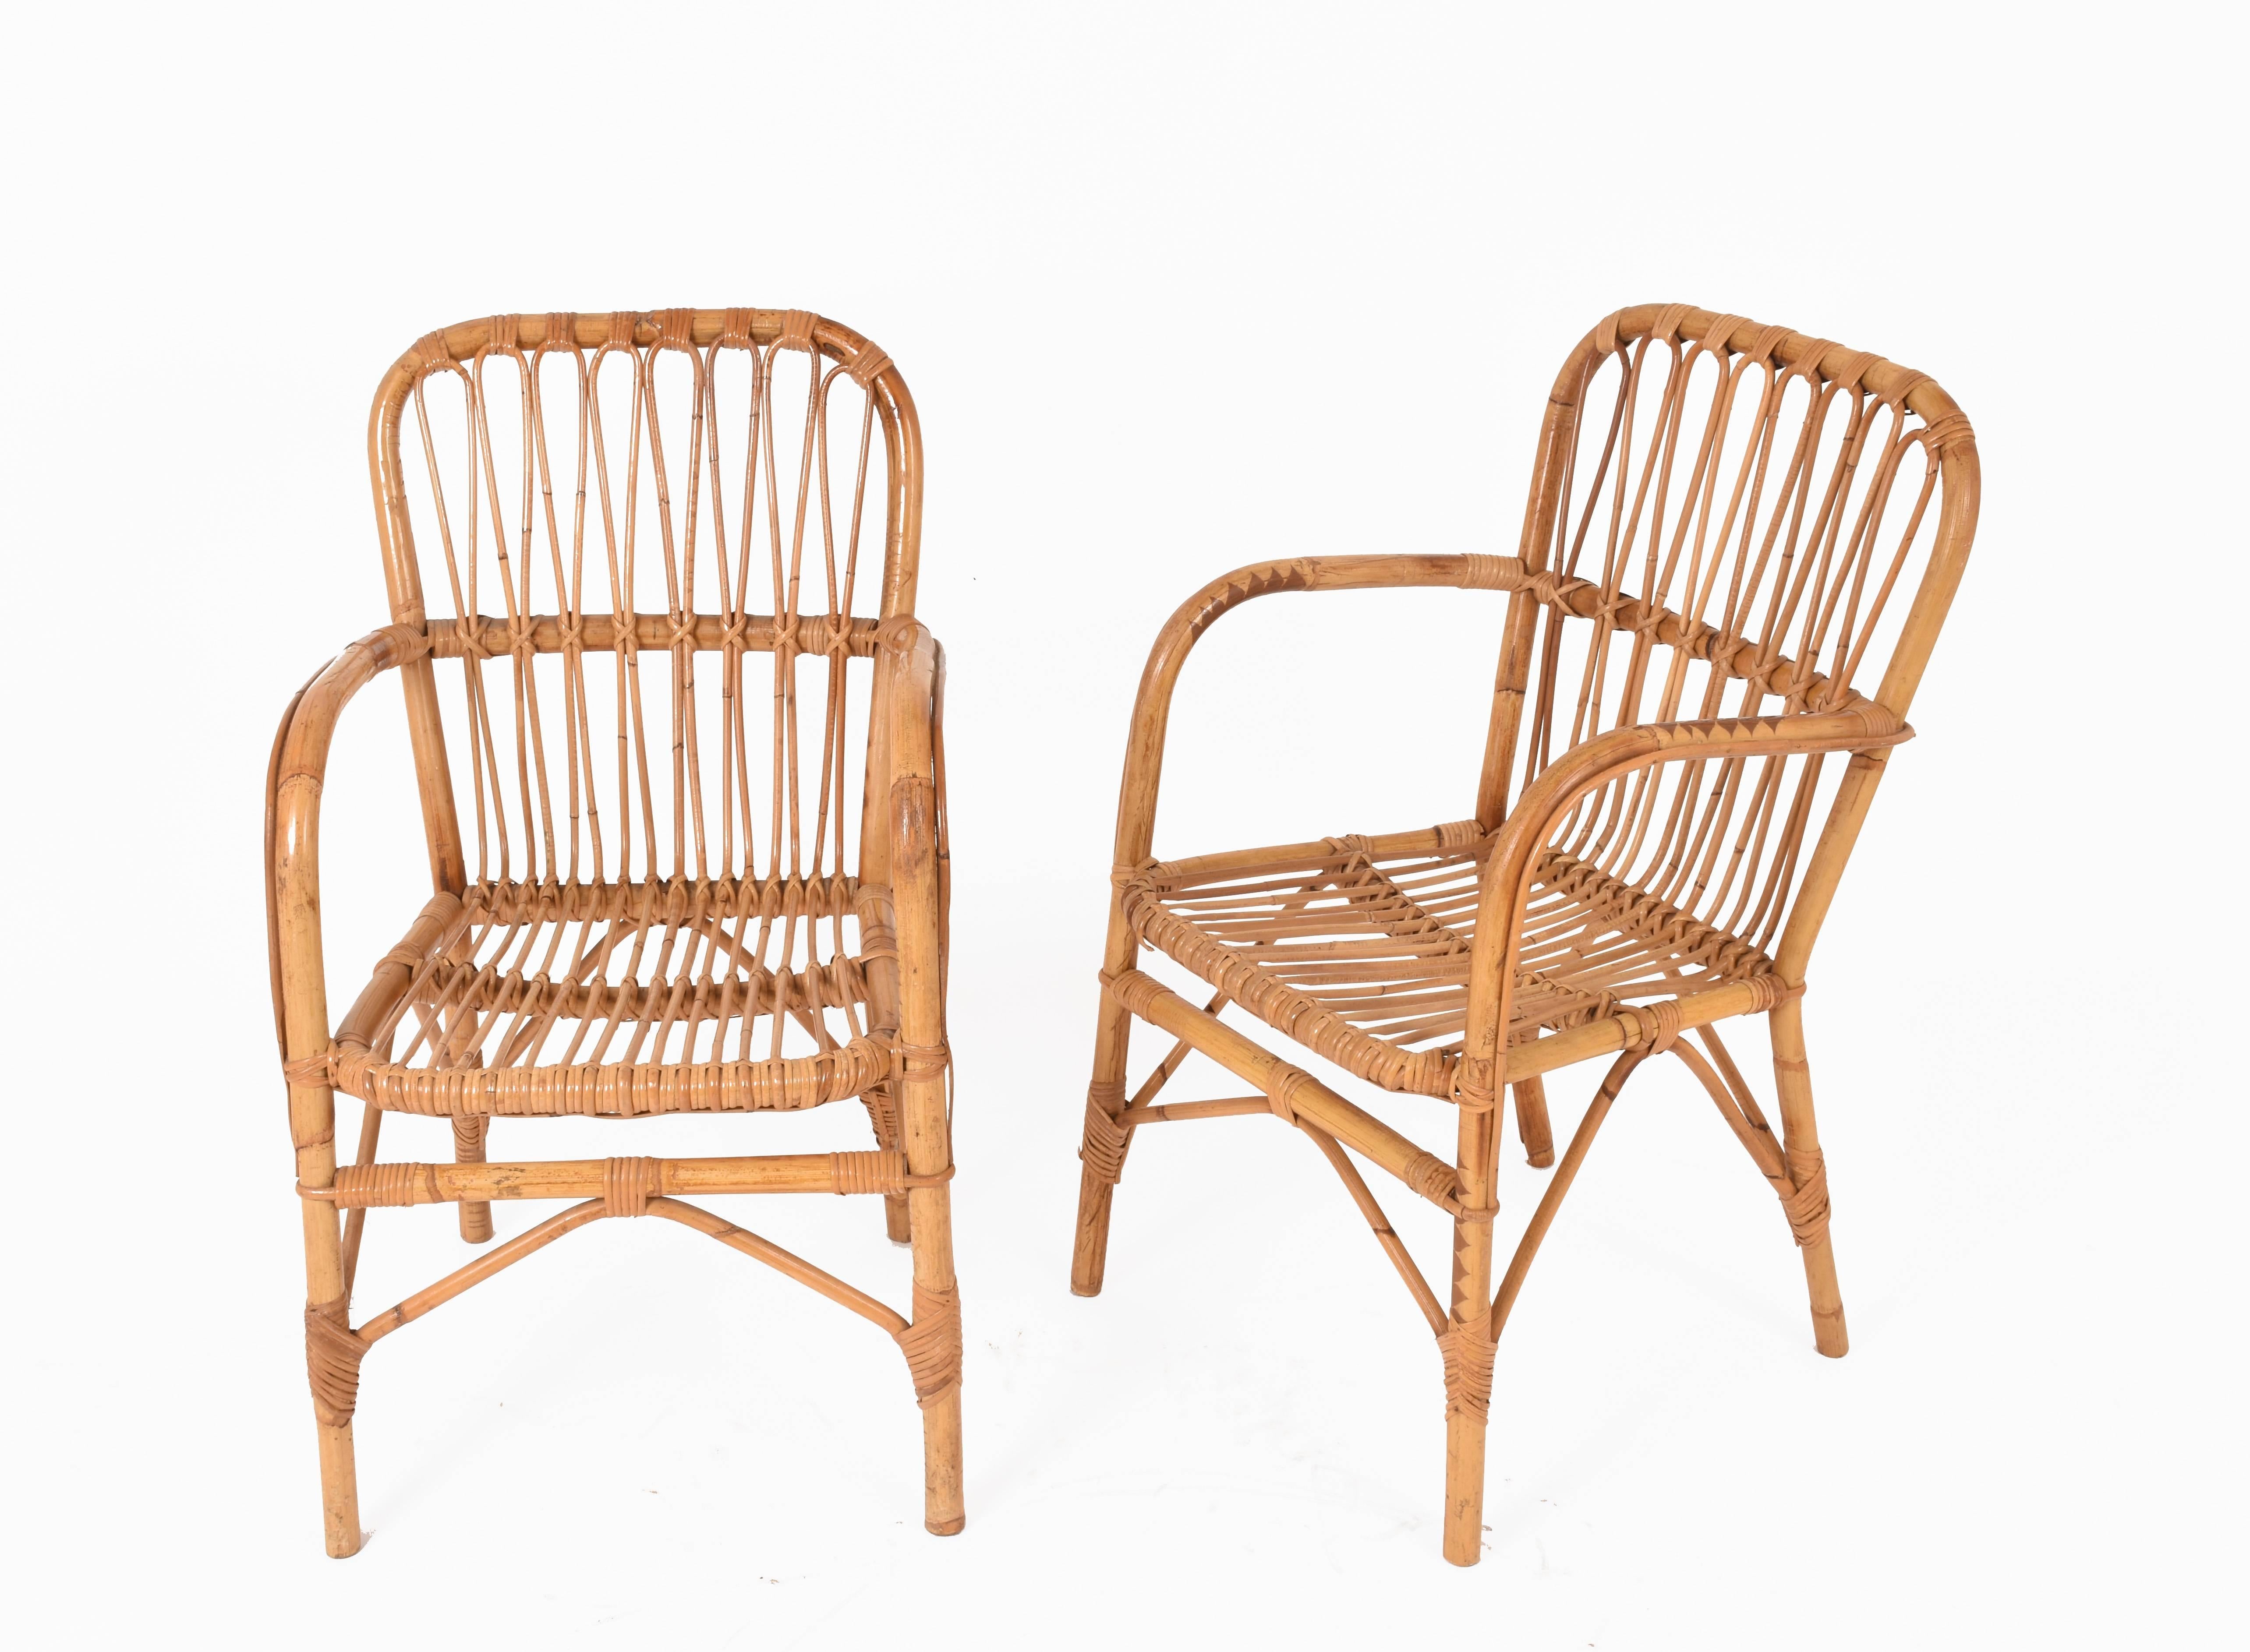 Set of six chairs midcentury Franco Albini style armchairs. Bamboo and wicker.